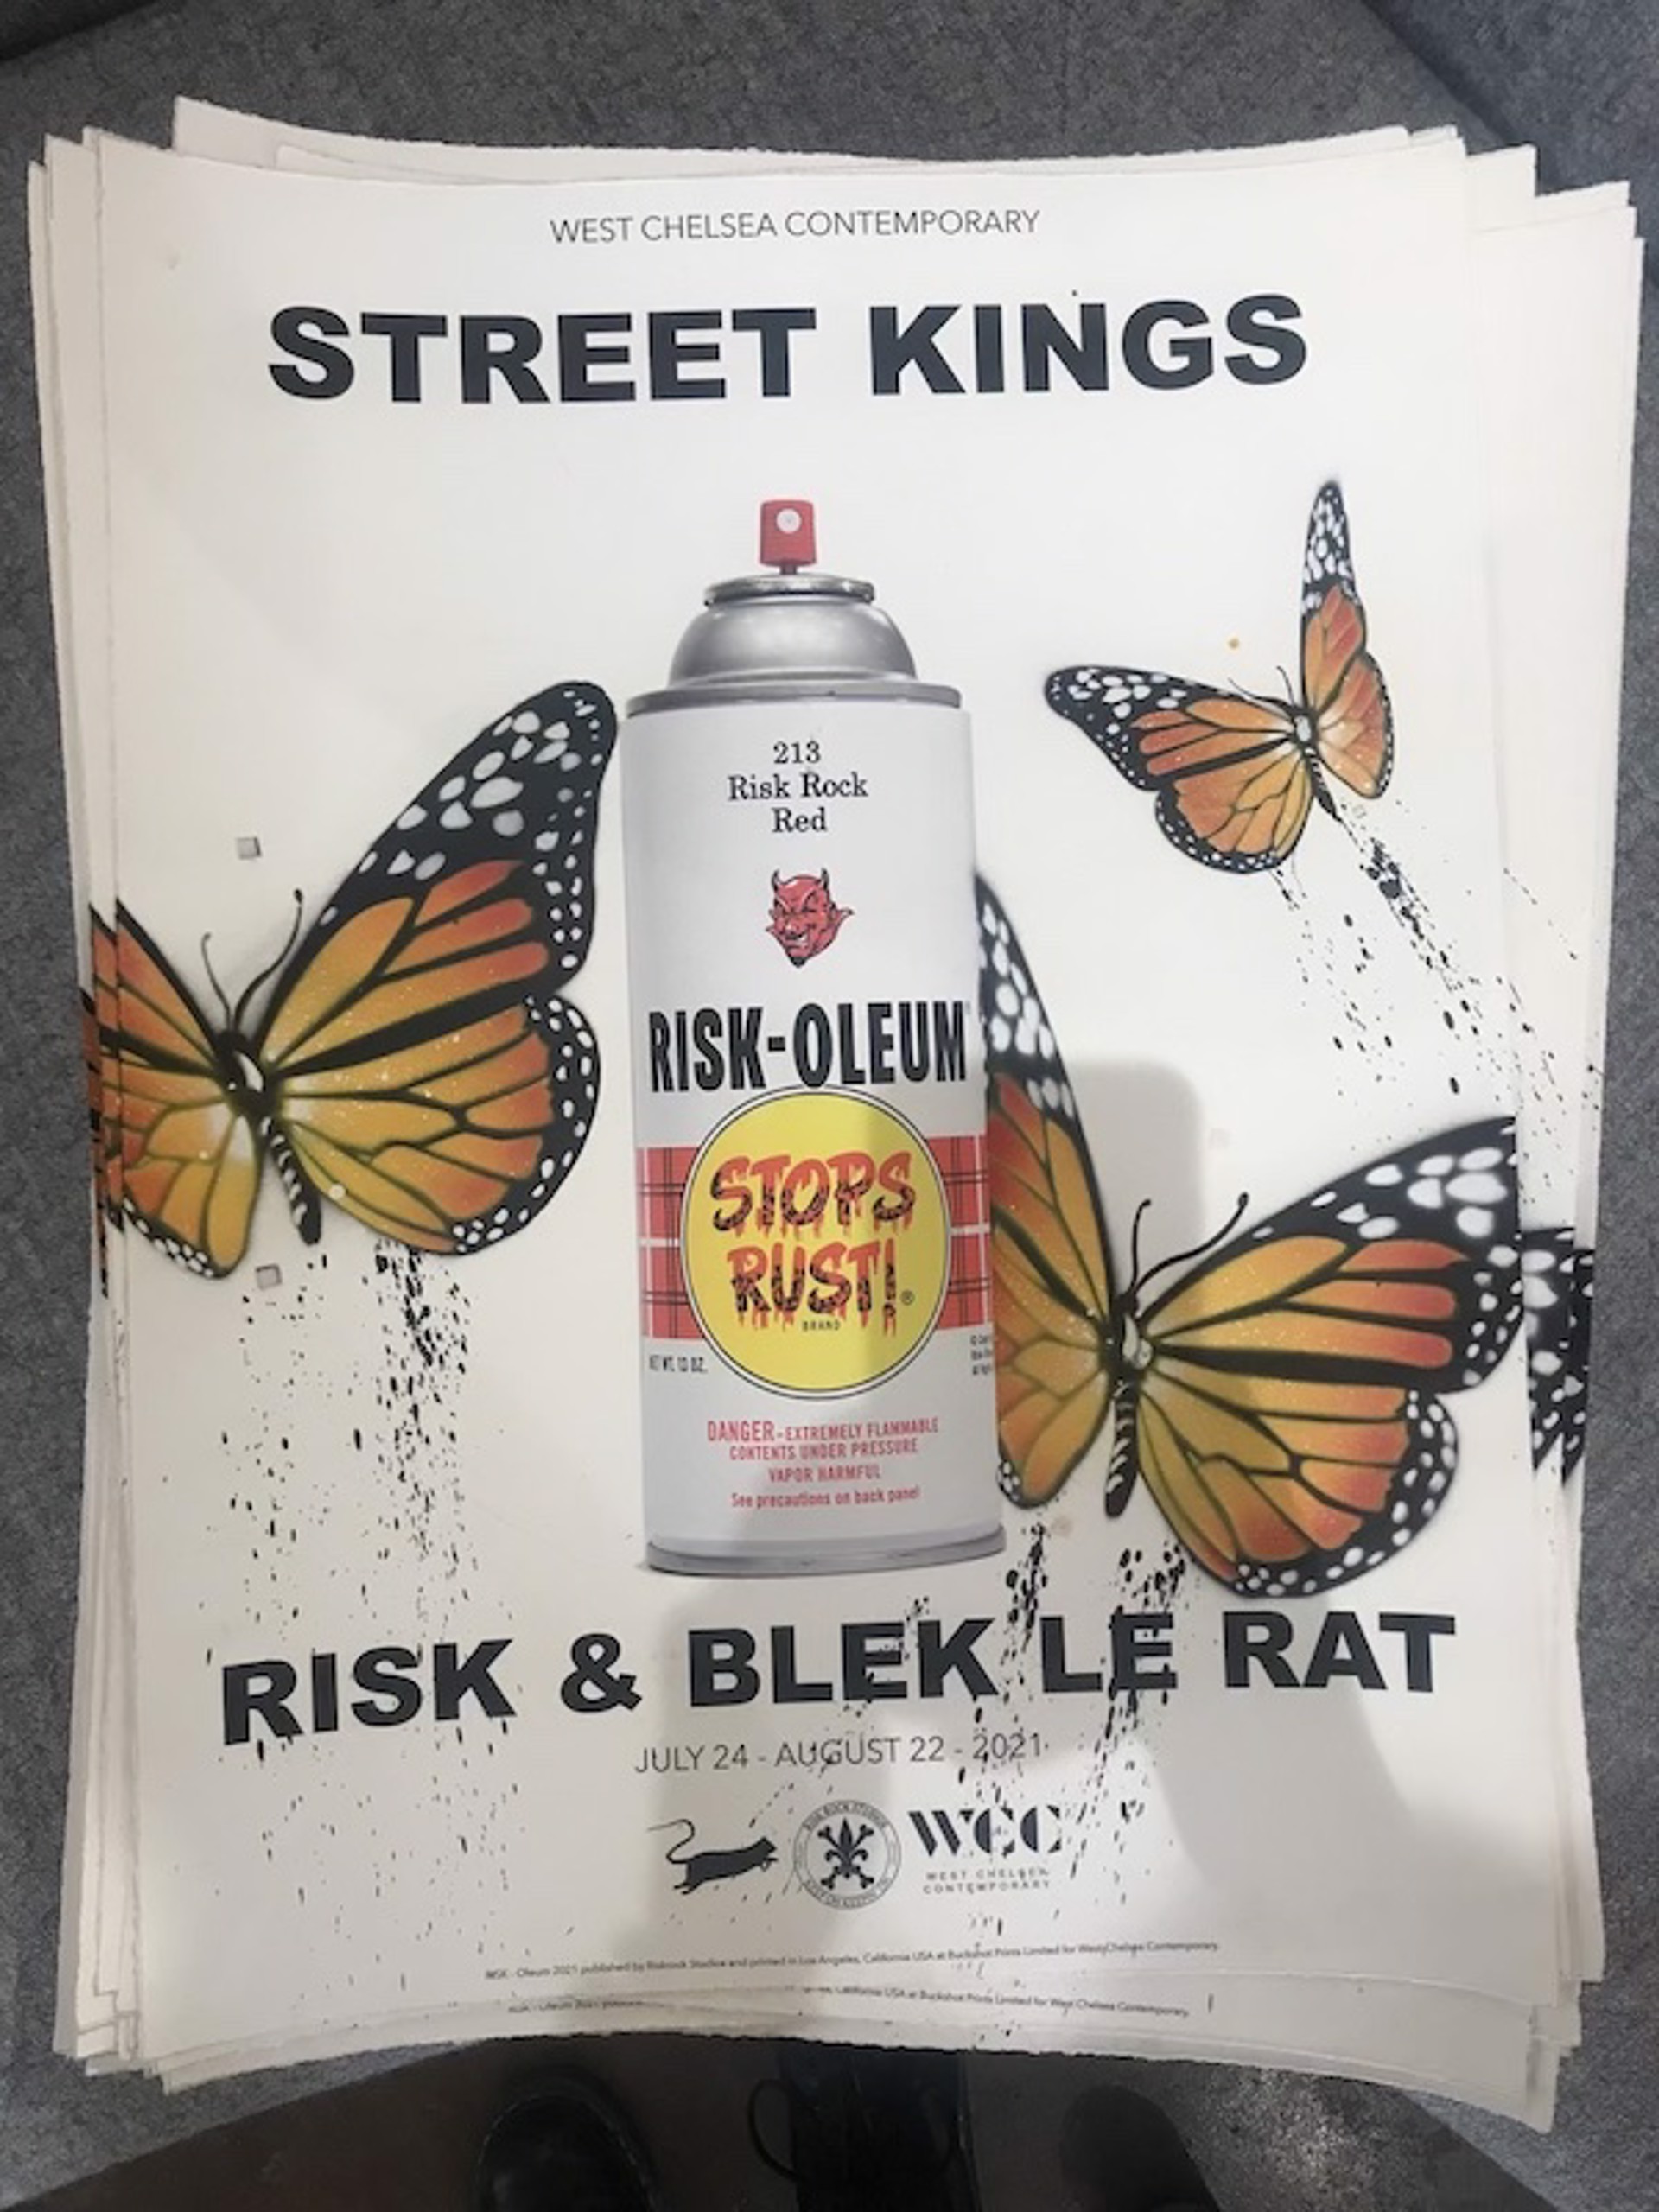 Street Kings Show Print (43/50) by Risk